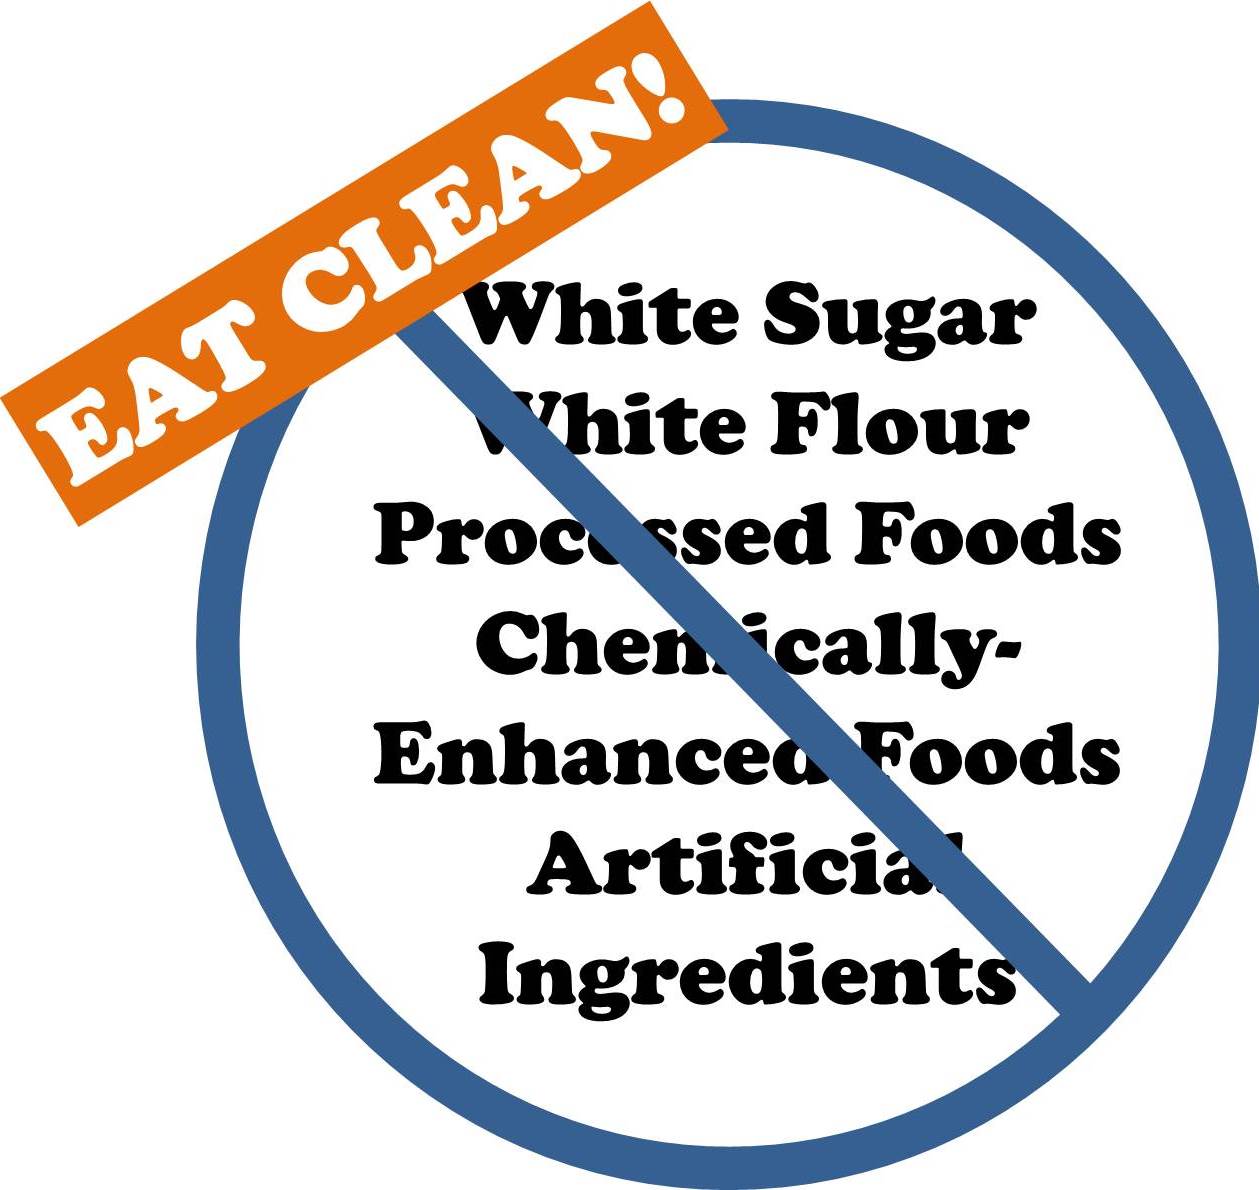 Eat_Clean_No_Processed_Foods_Chemically_Chemicals_Enhanced_Artificial_White_Flour_Sugar_He_and_She_Eat_Clean_motto